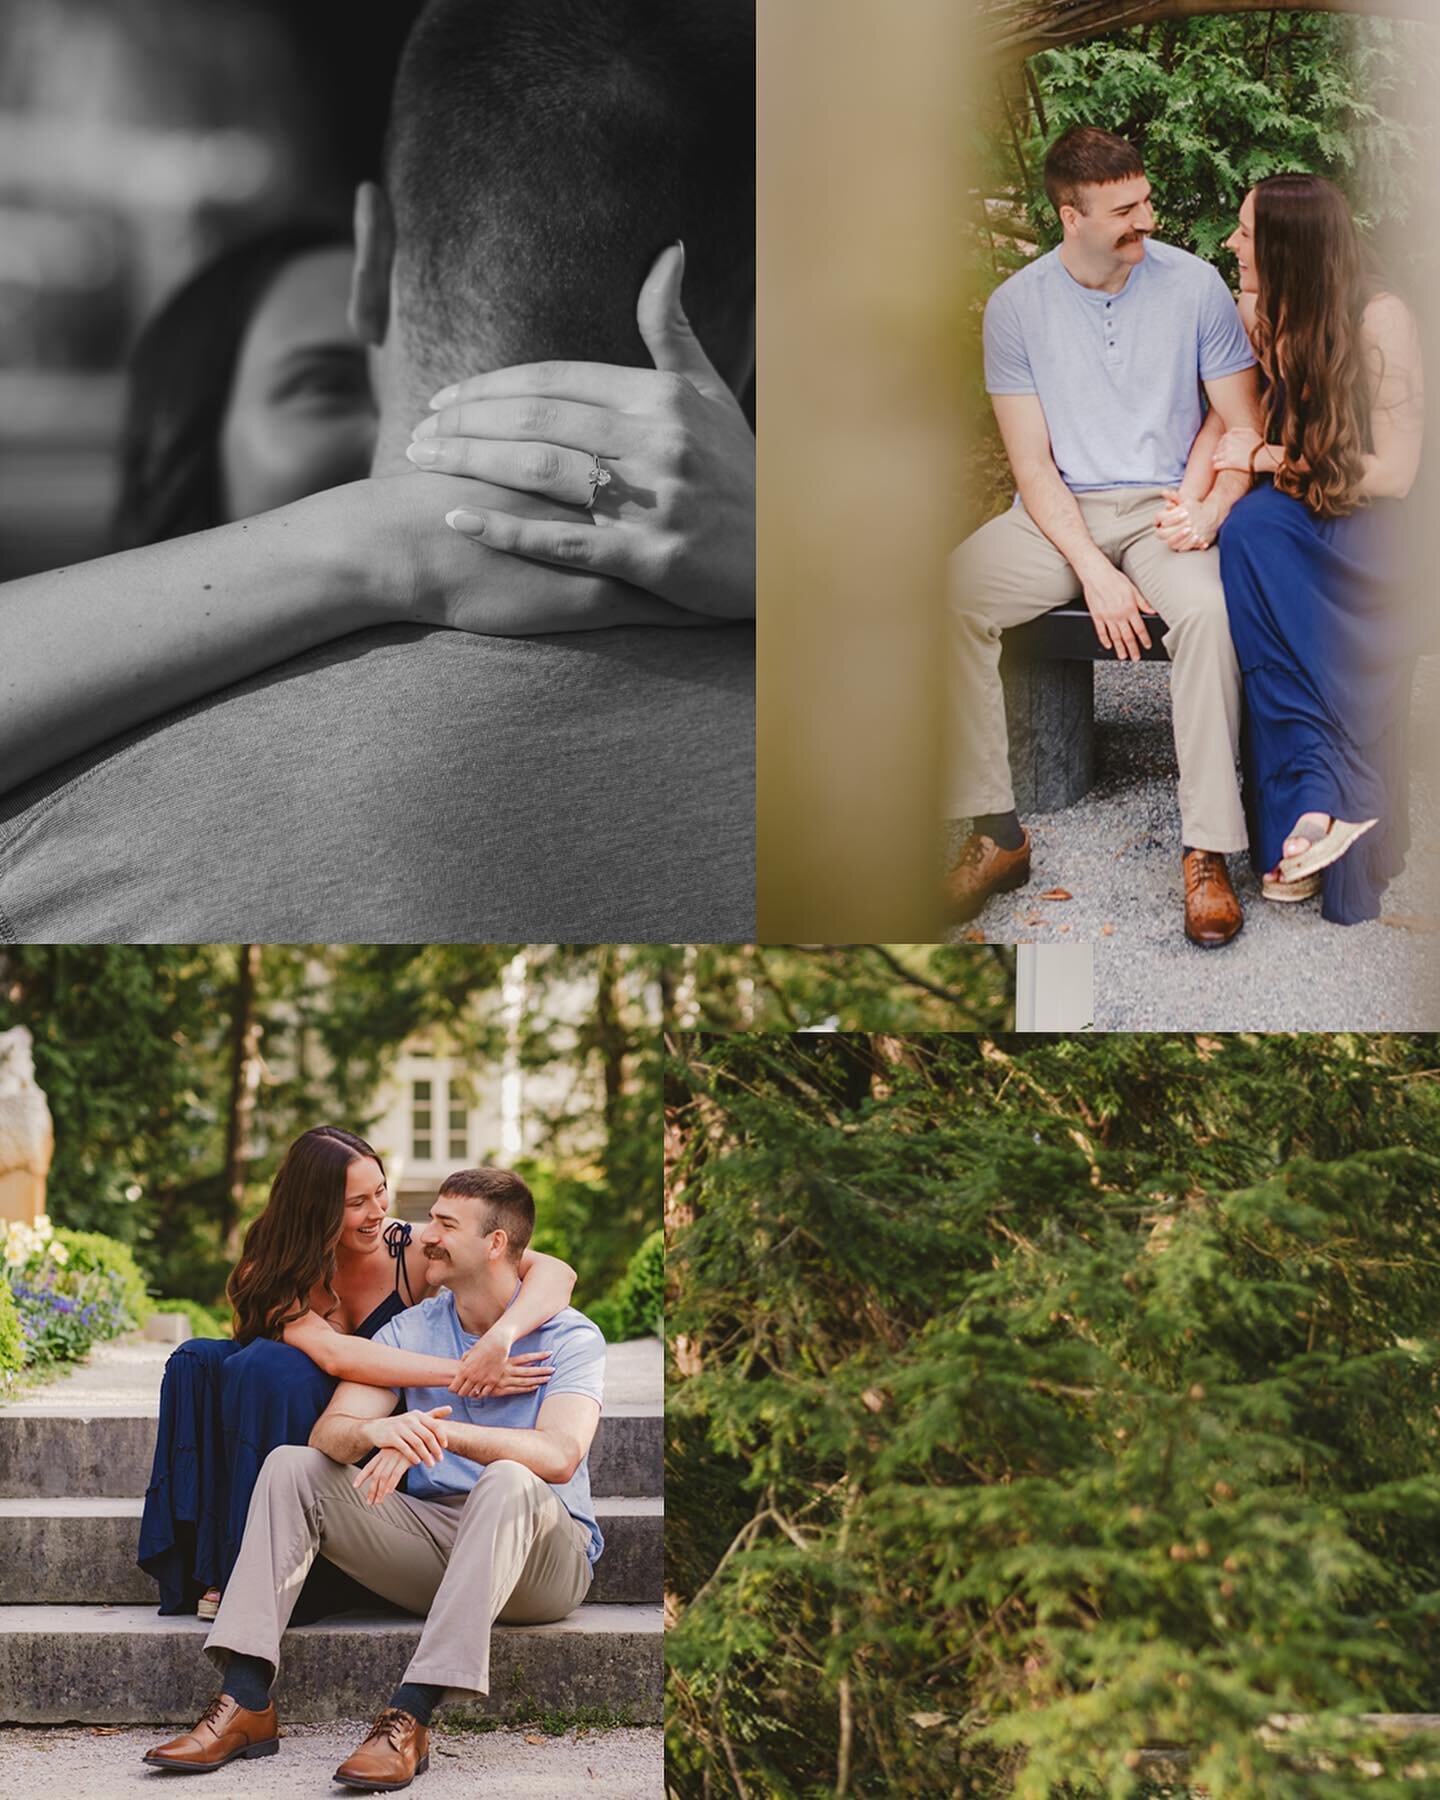 Amazing engagement session for Isabel &amp; Andrew! Newfields is a gem of a location for photos and the beautiful weather didn&rsquo;t hurt either. Looking forward to their wedding later this summer!